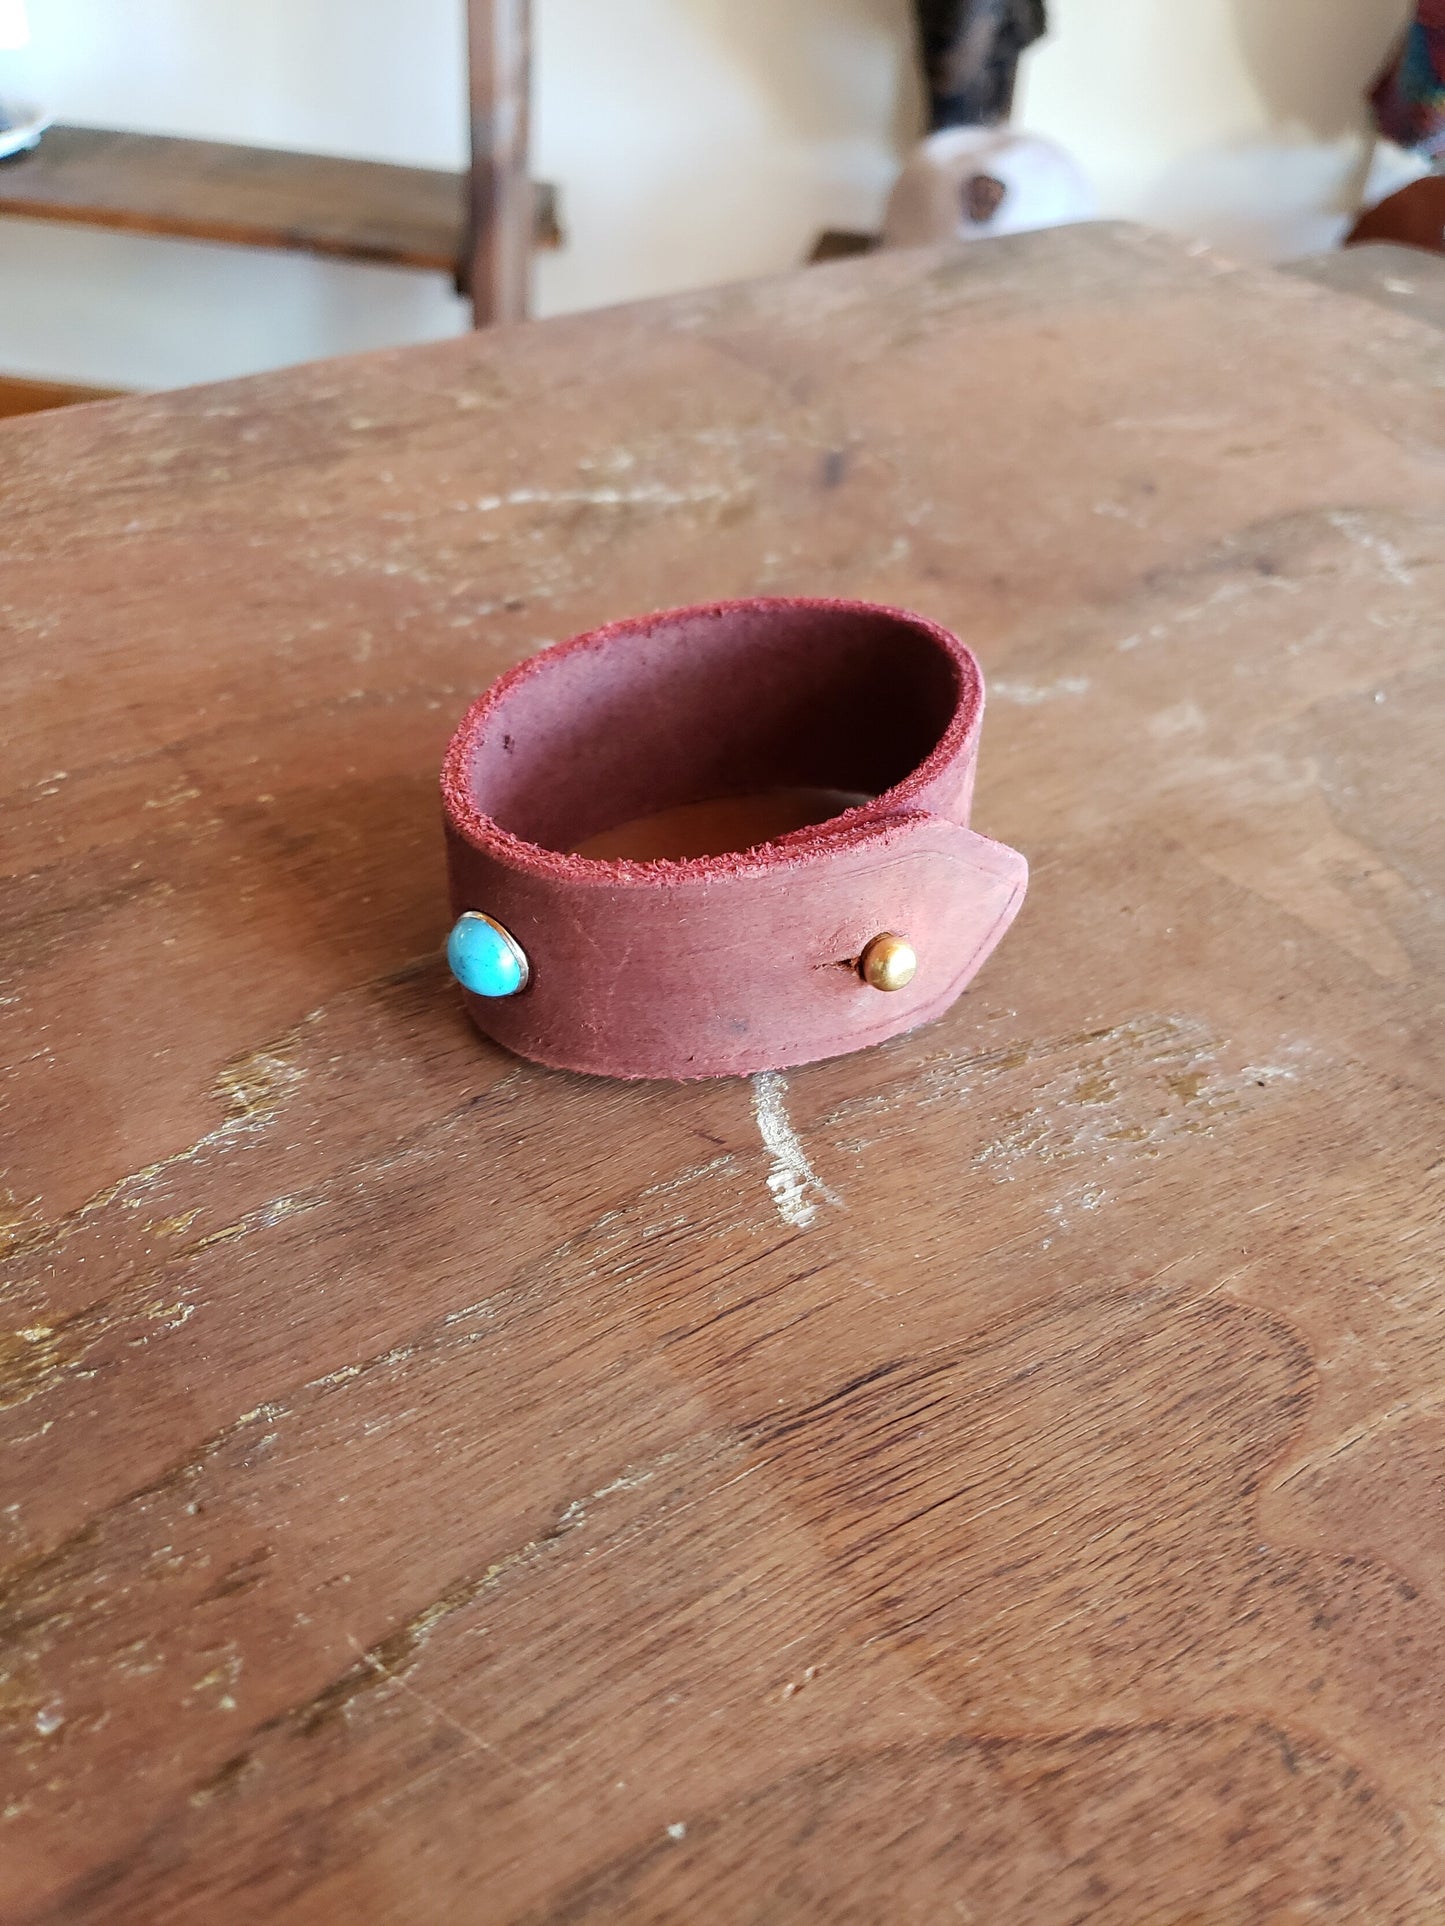 Oxblood Red Leather Band Bracelet with Turquoise Stone